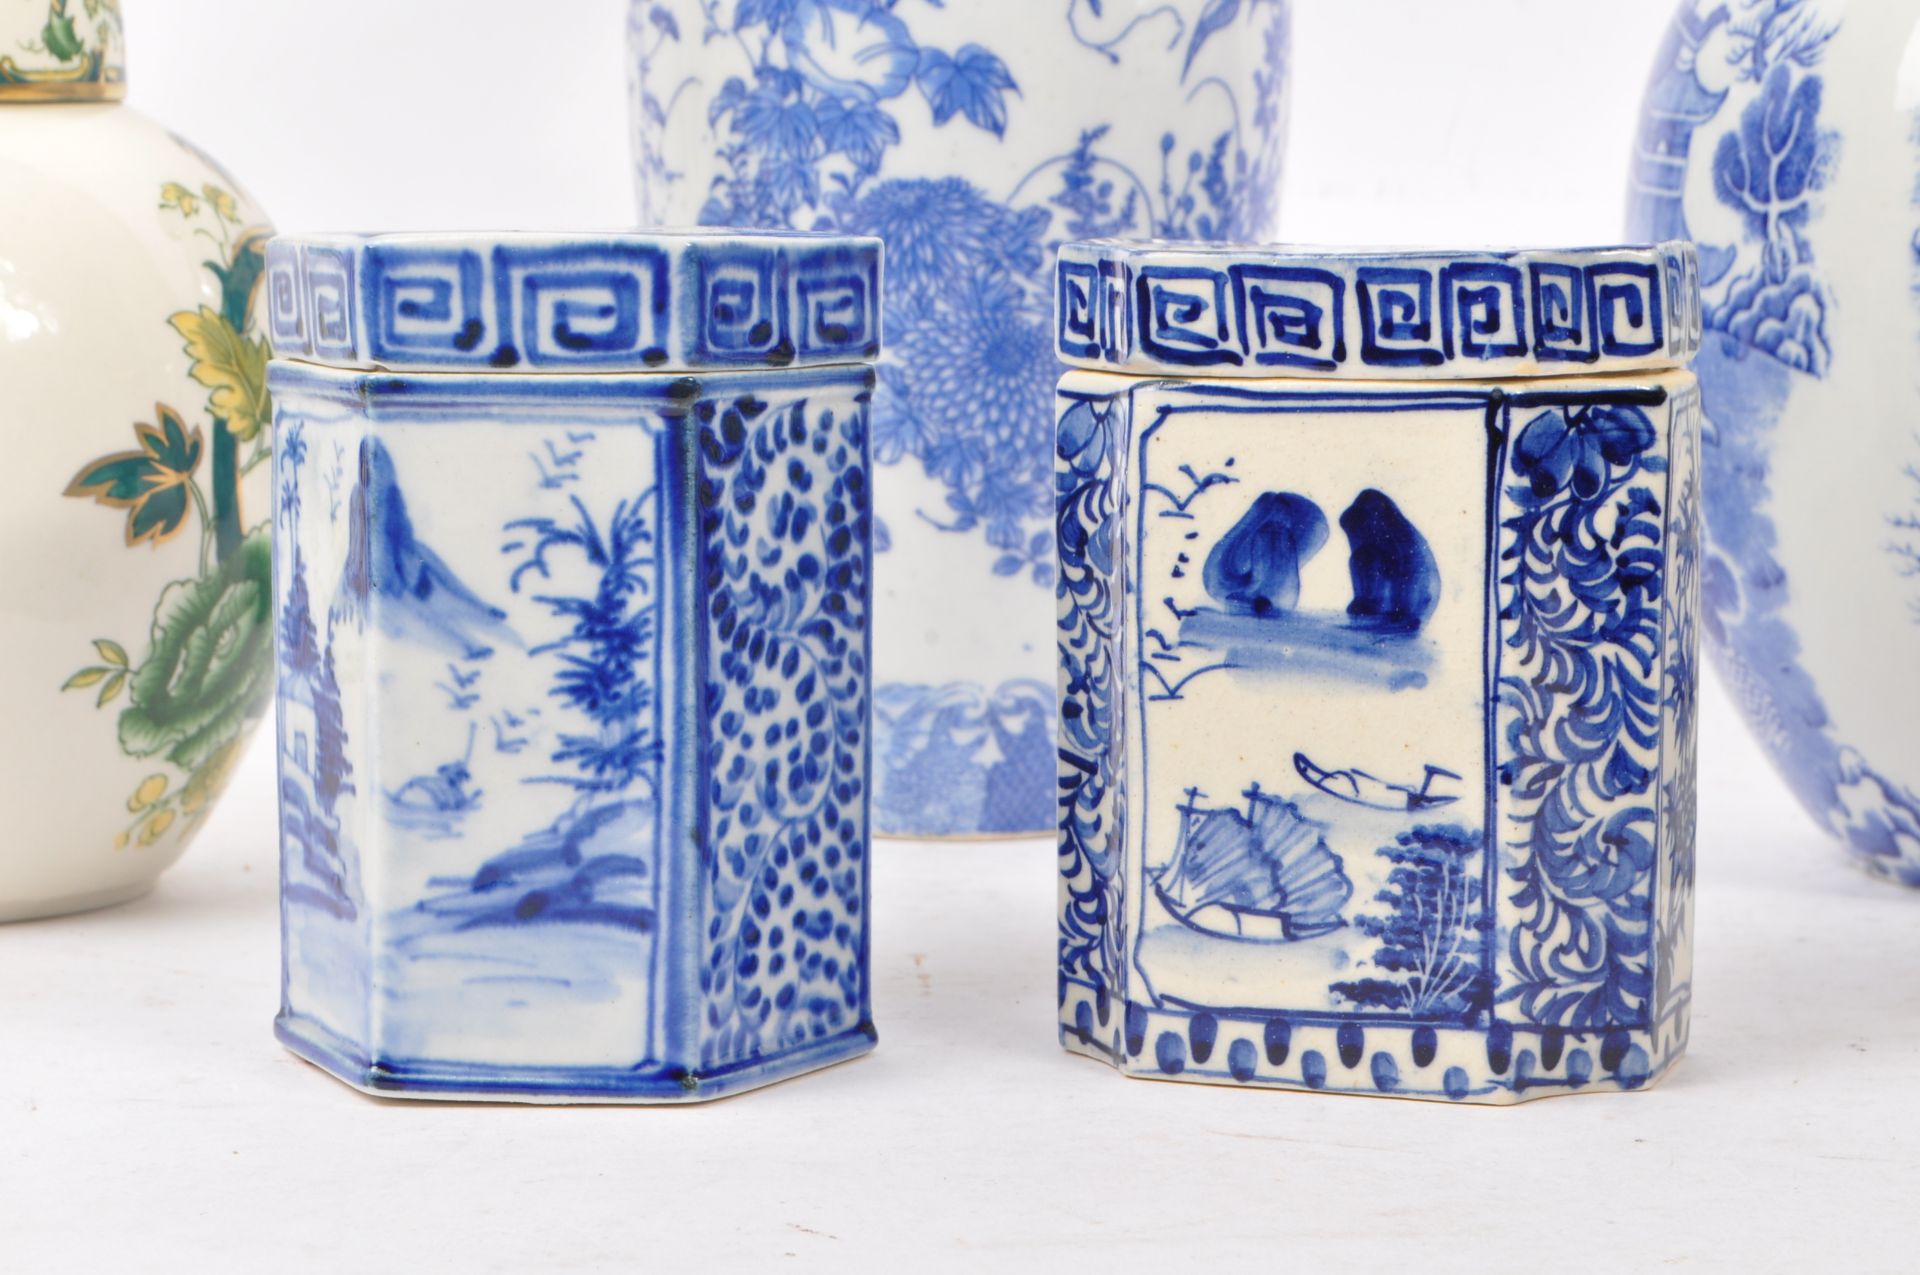 MASON'S - COLLECTION OF BRITISH AND CHINESE PORCELAIN ITEMS - Image 2 of 10